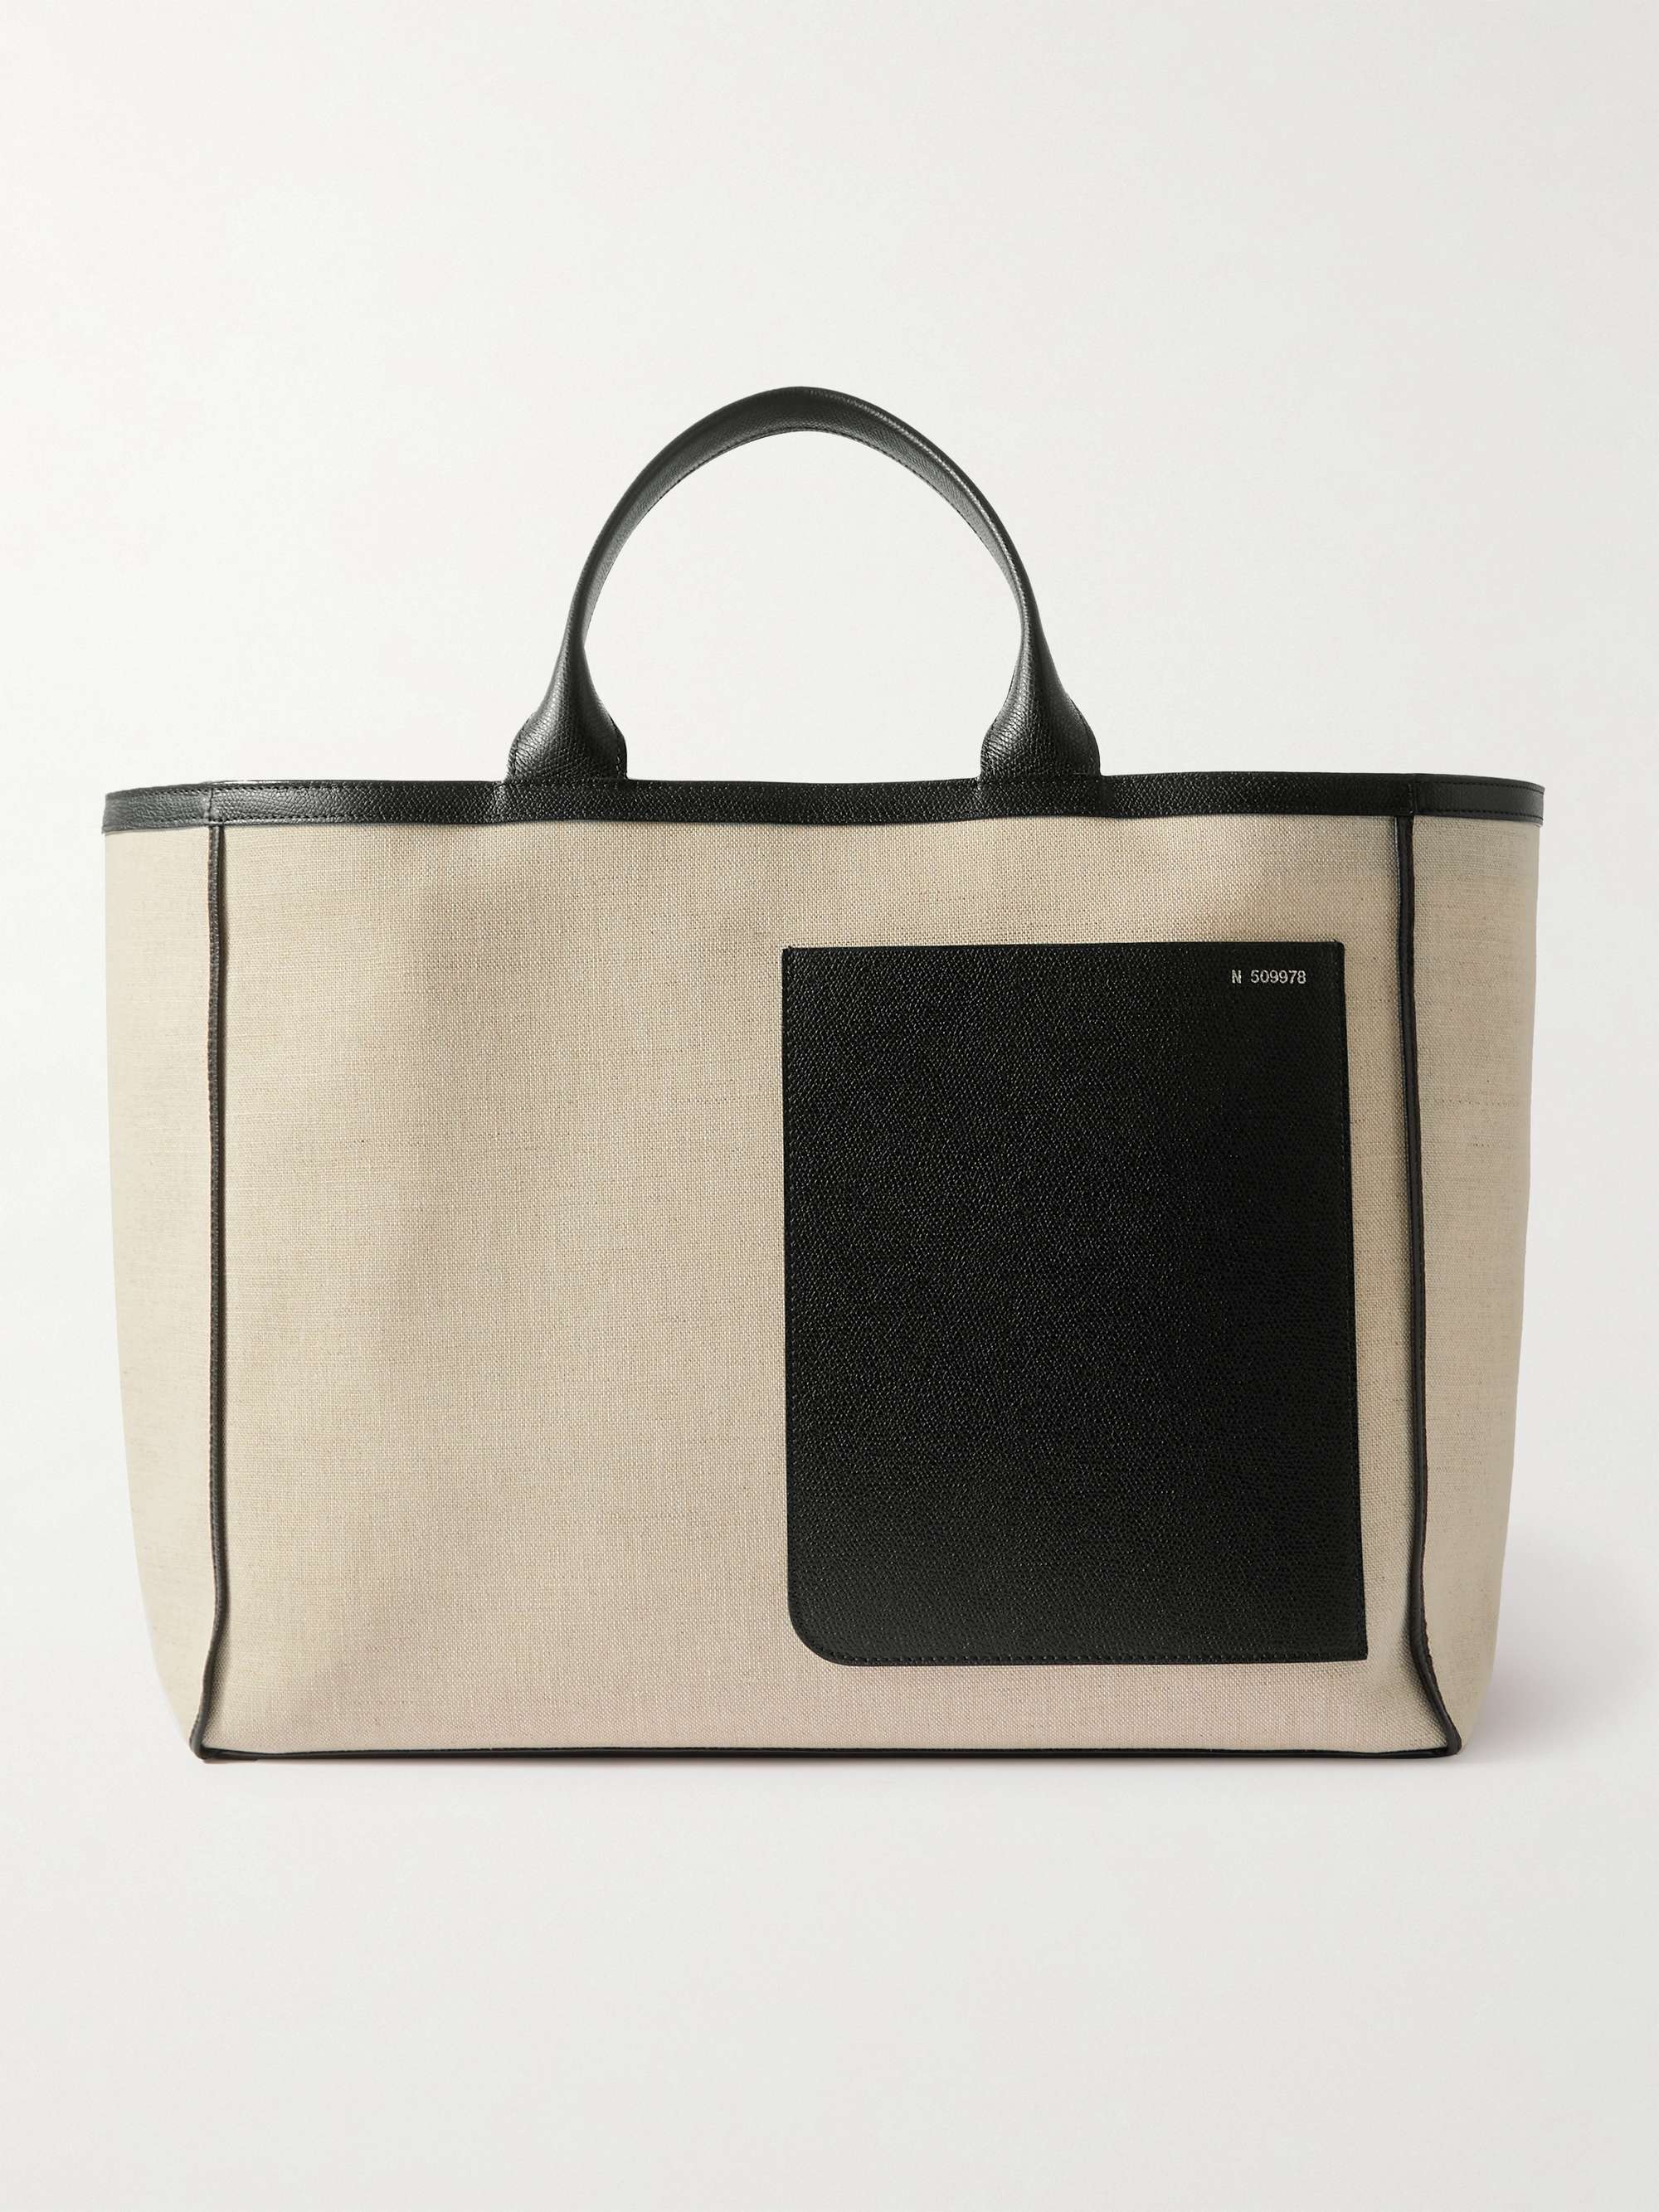 VALEXTRA Leather-Trimmed Canvas Tote Bag